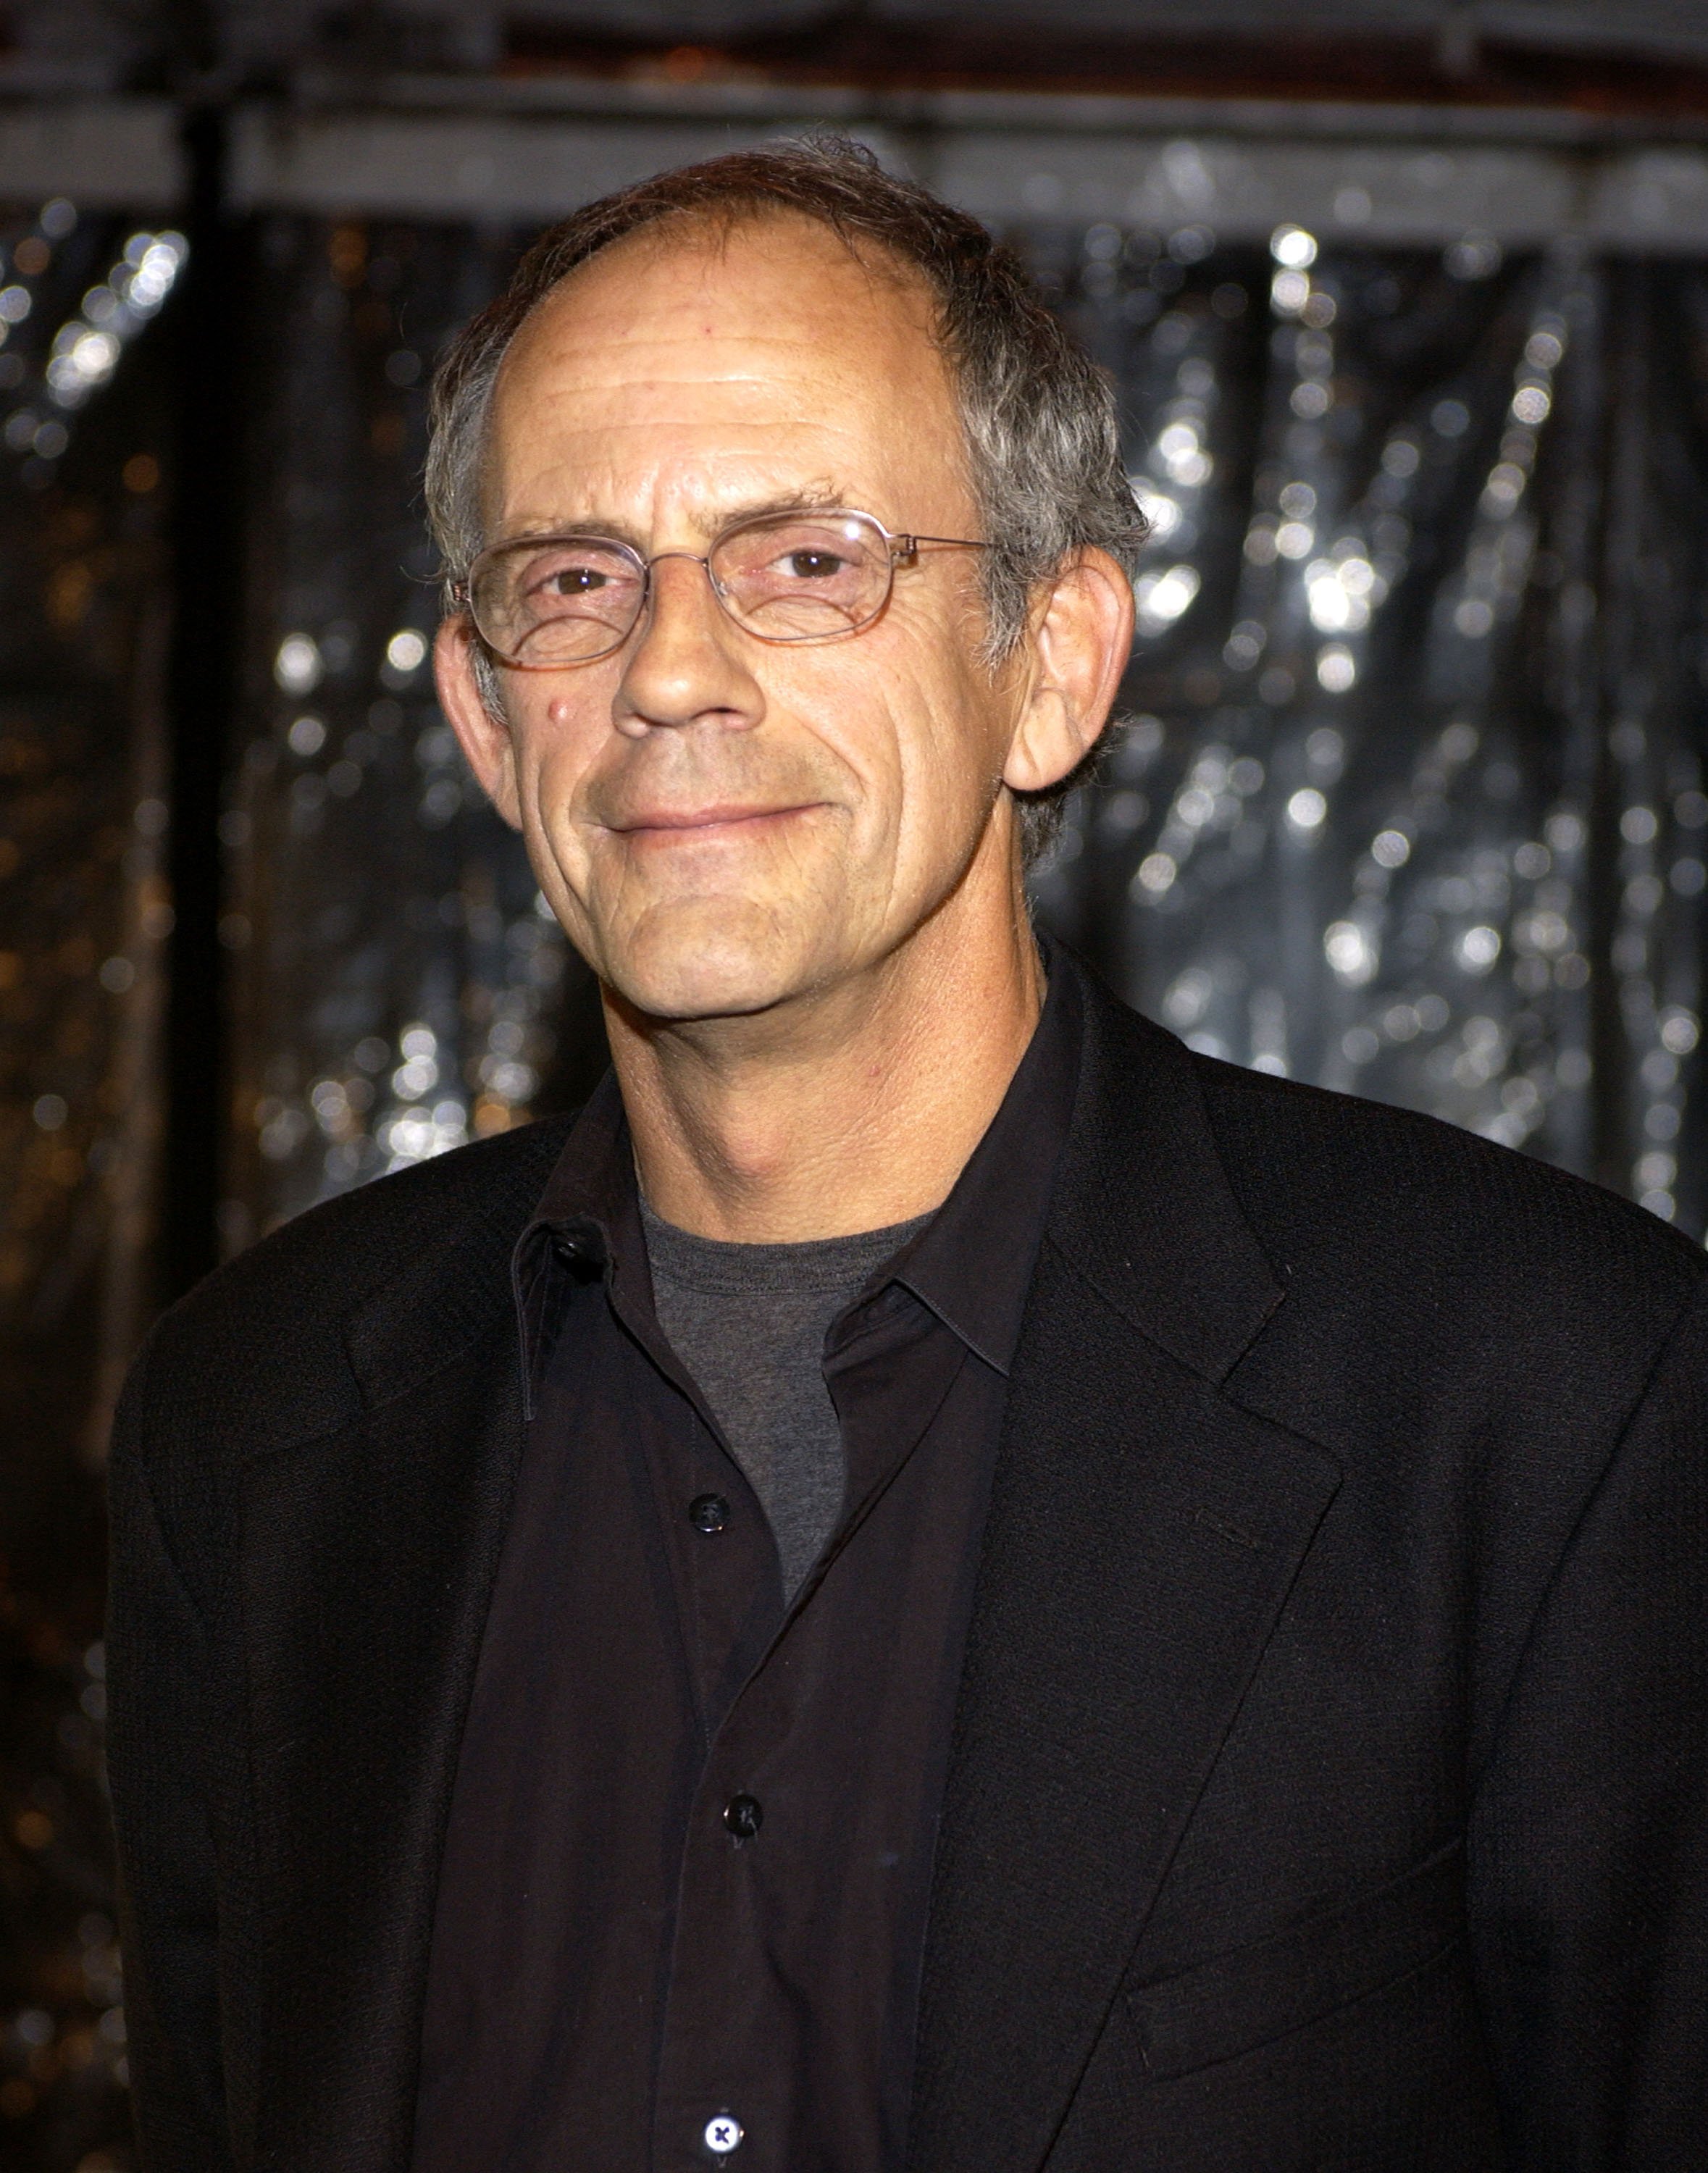 Christopher Lloyd at the "Back To The Future" reunion and DVD launch party in Universal City, California, on December 16, 2002. | Source: Getty Images